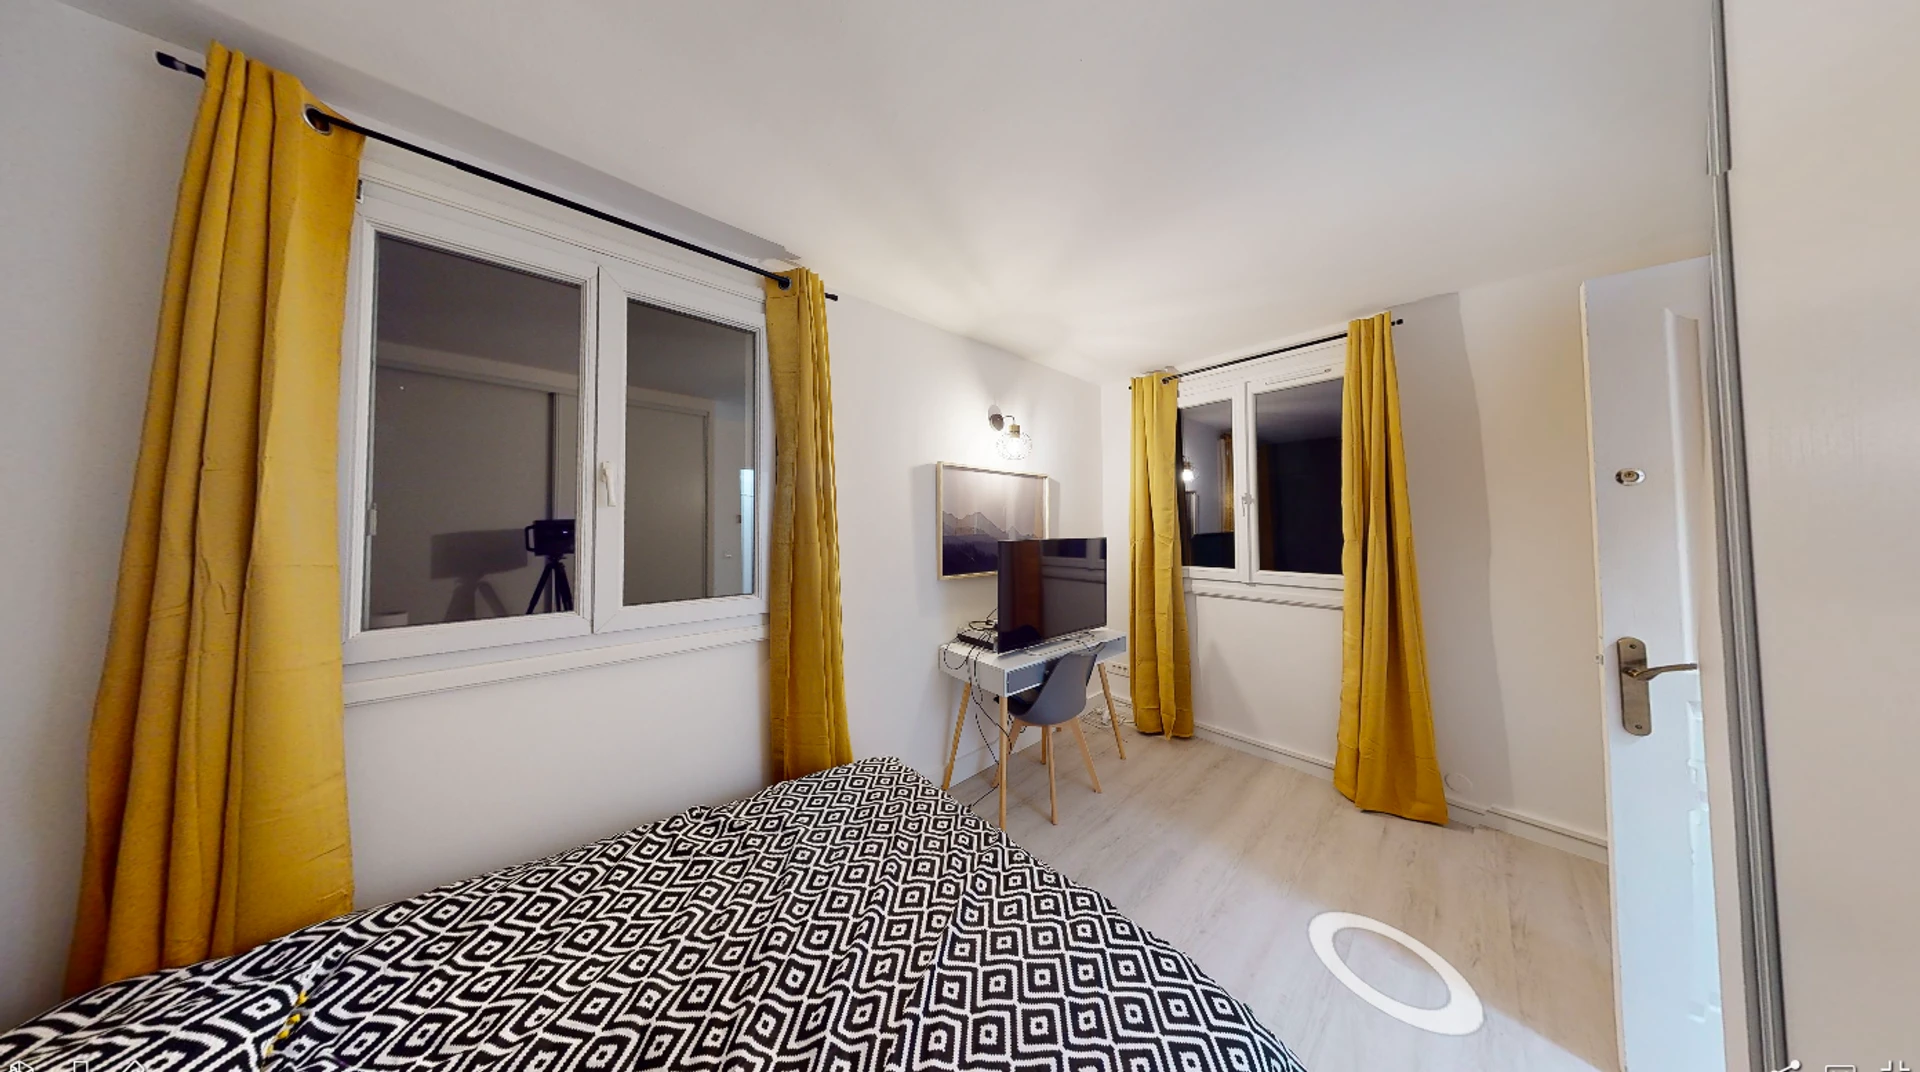 318 Private rooms for rent in Montpellier | Erasmus Play